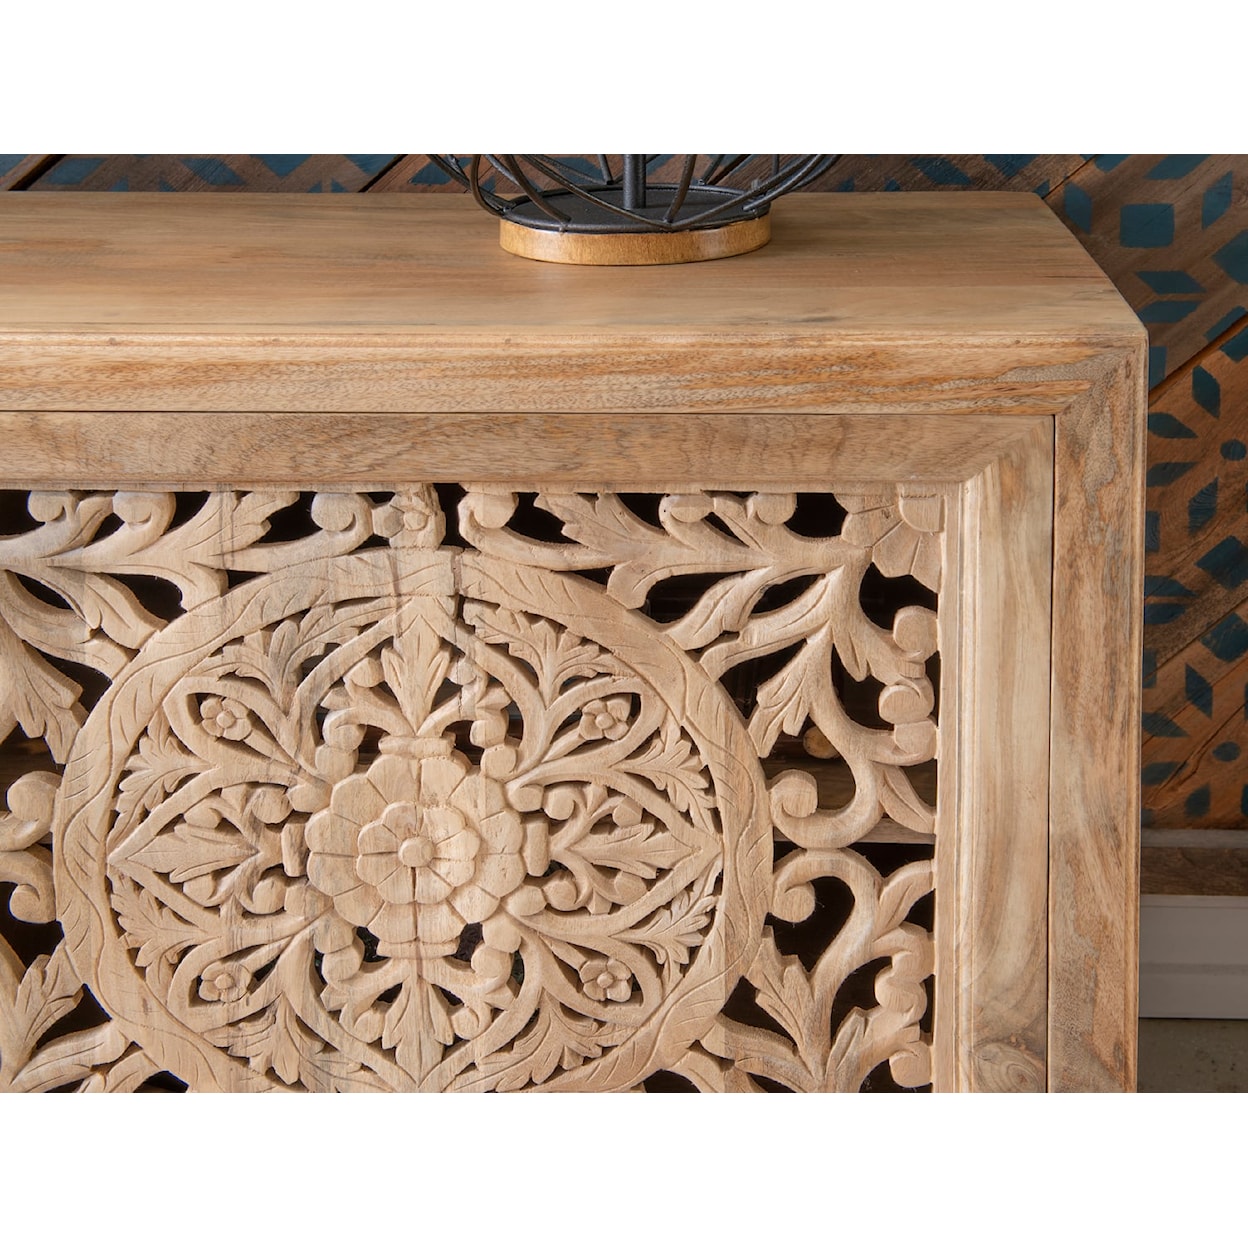 LaHave Furniture Heidi 2 Door Carved Console